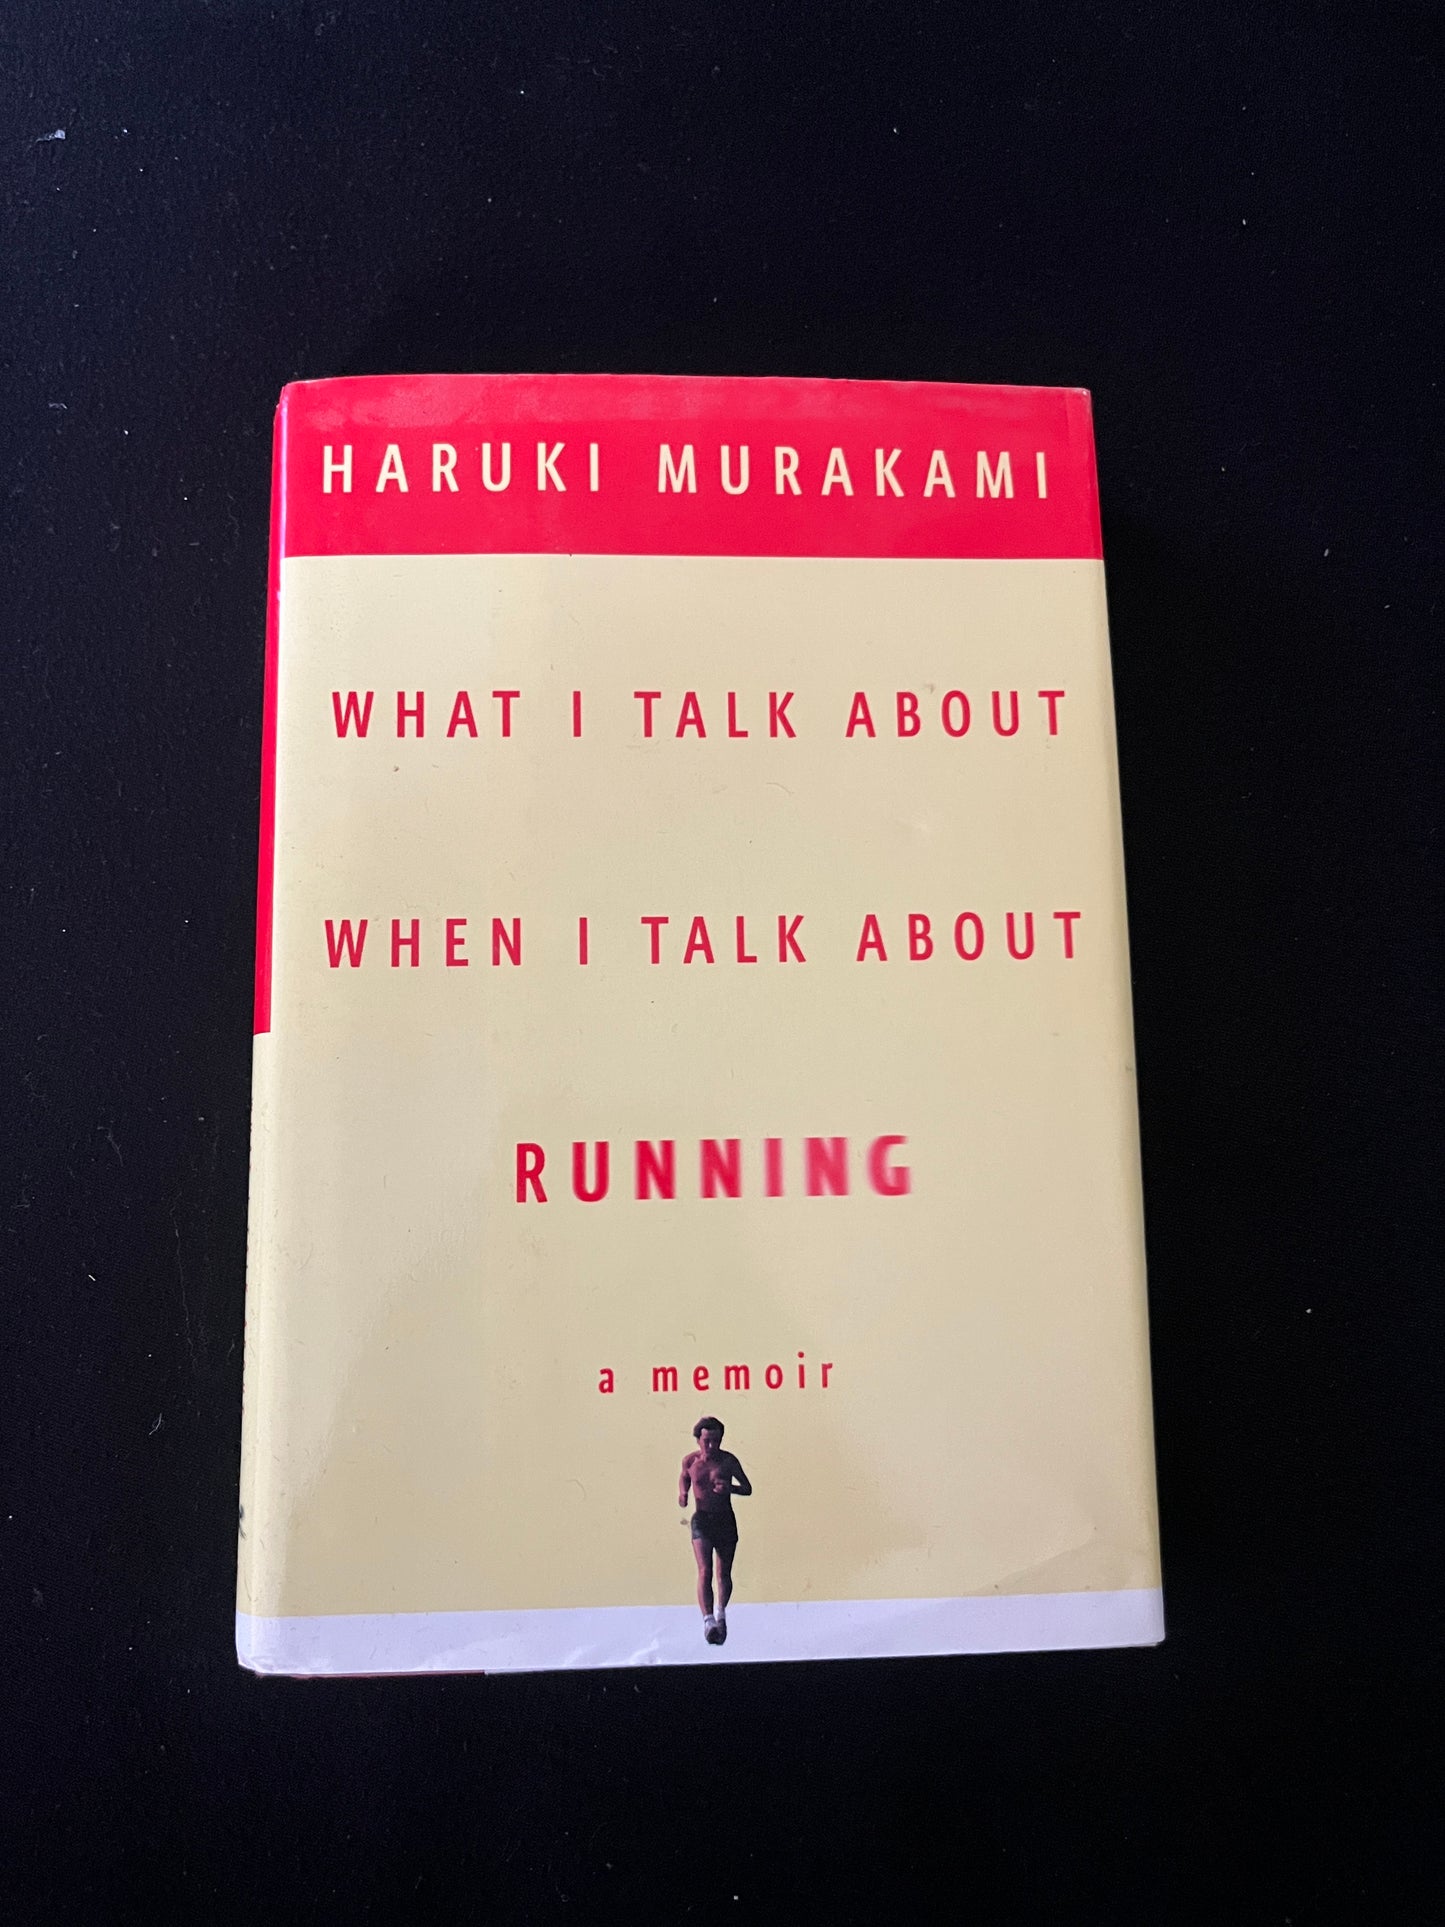 WHAT I TALK ABOUT WHEN I TALK ABOUT RUNNING by Haruki Murakami